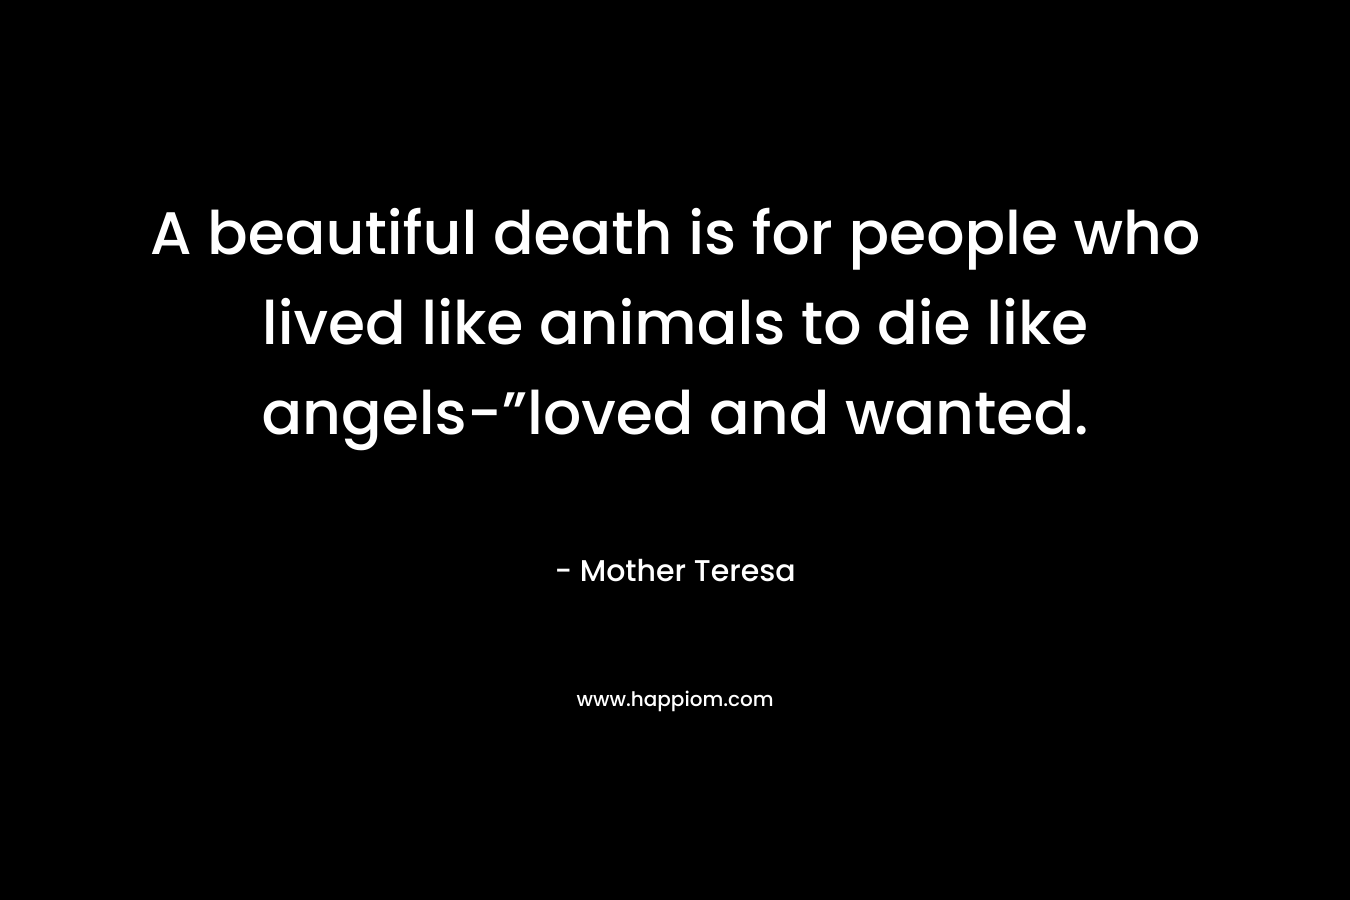 A beautiful death is for people who lived like animals to die like angels-”loved and wanted. – Mother Teresa